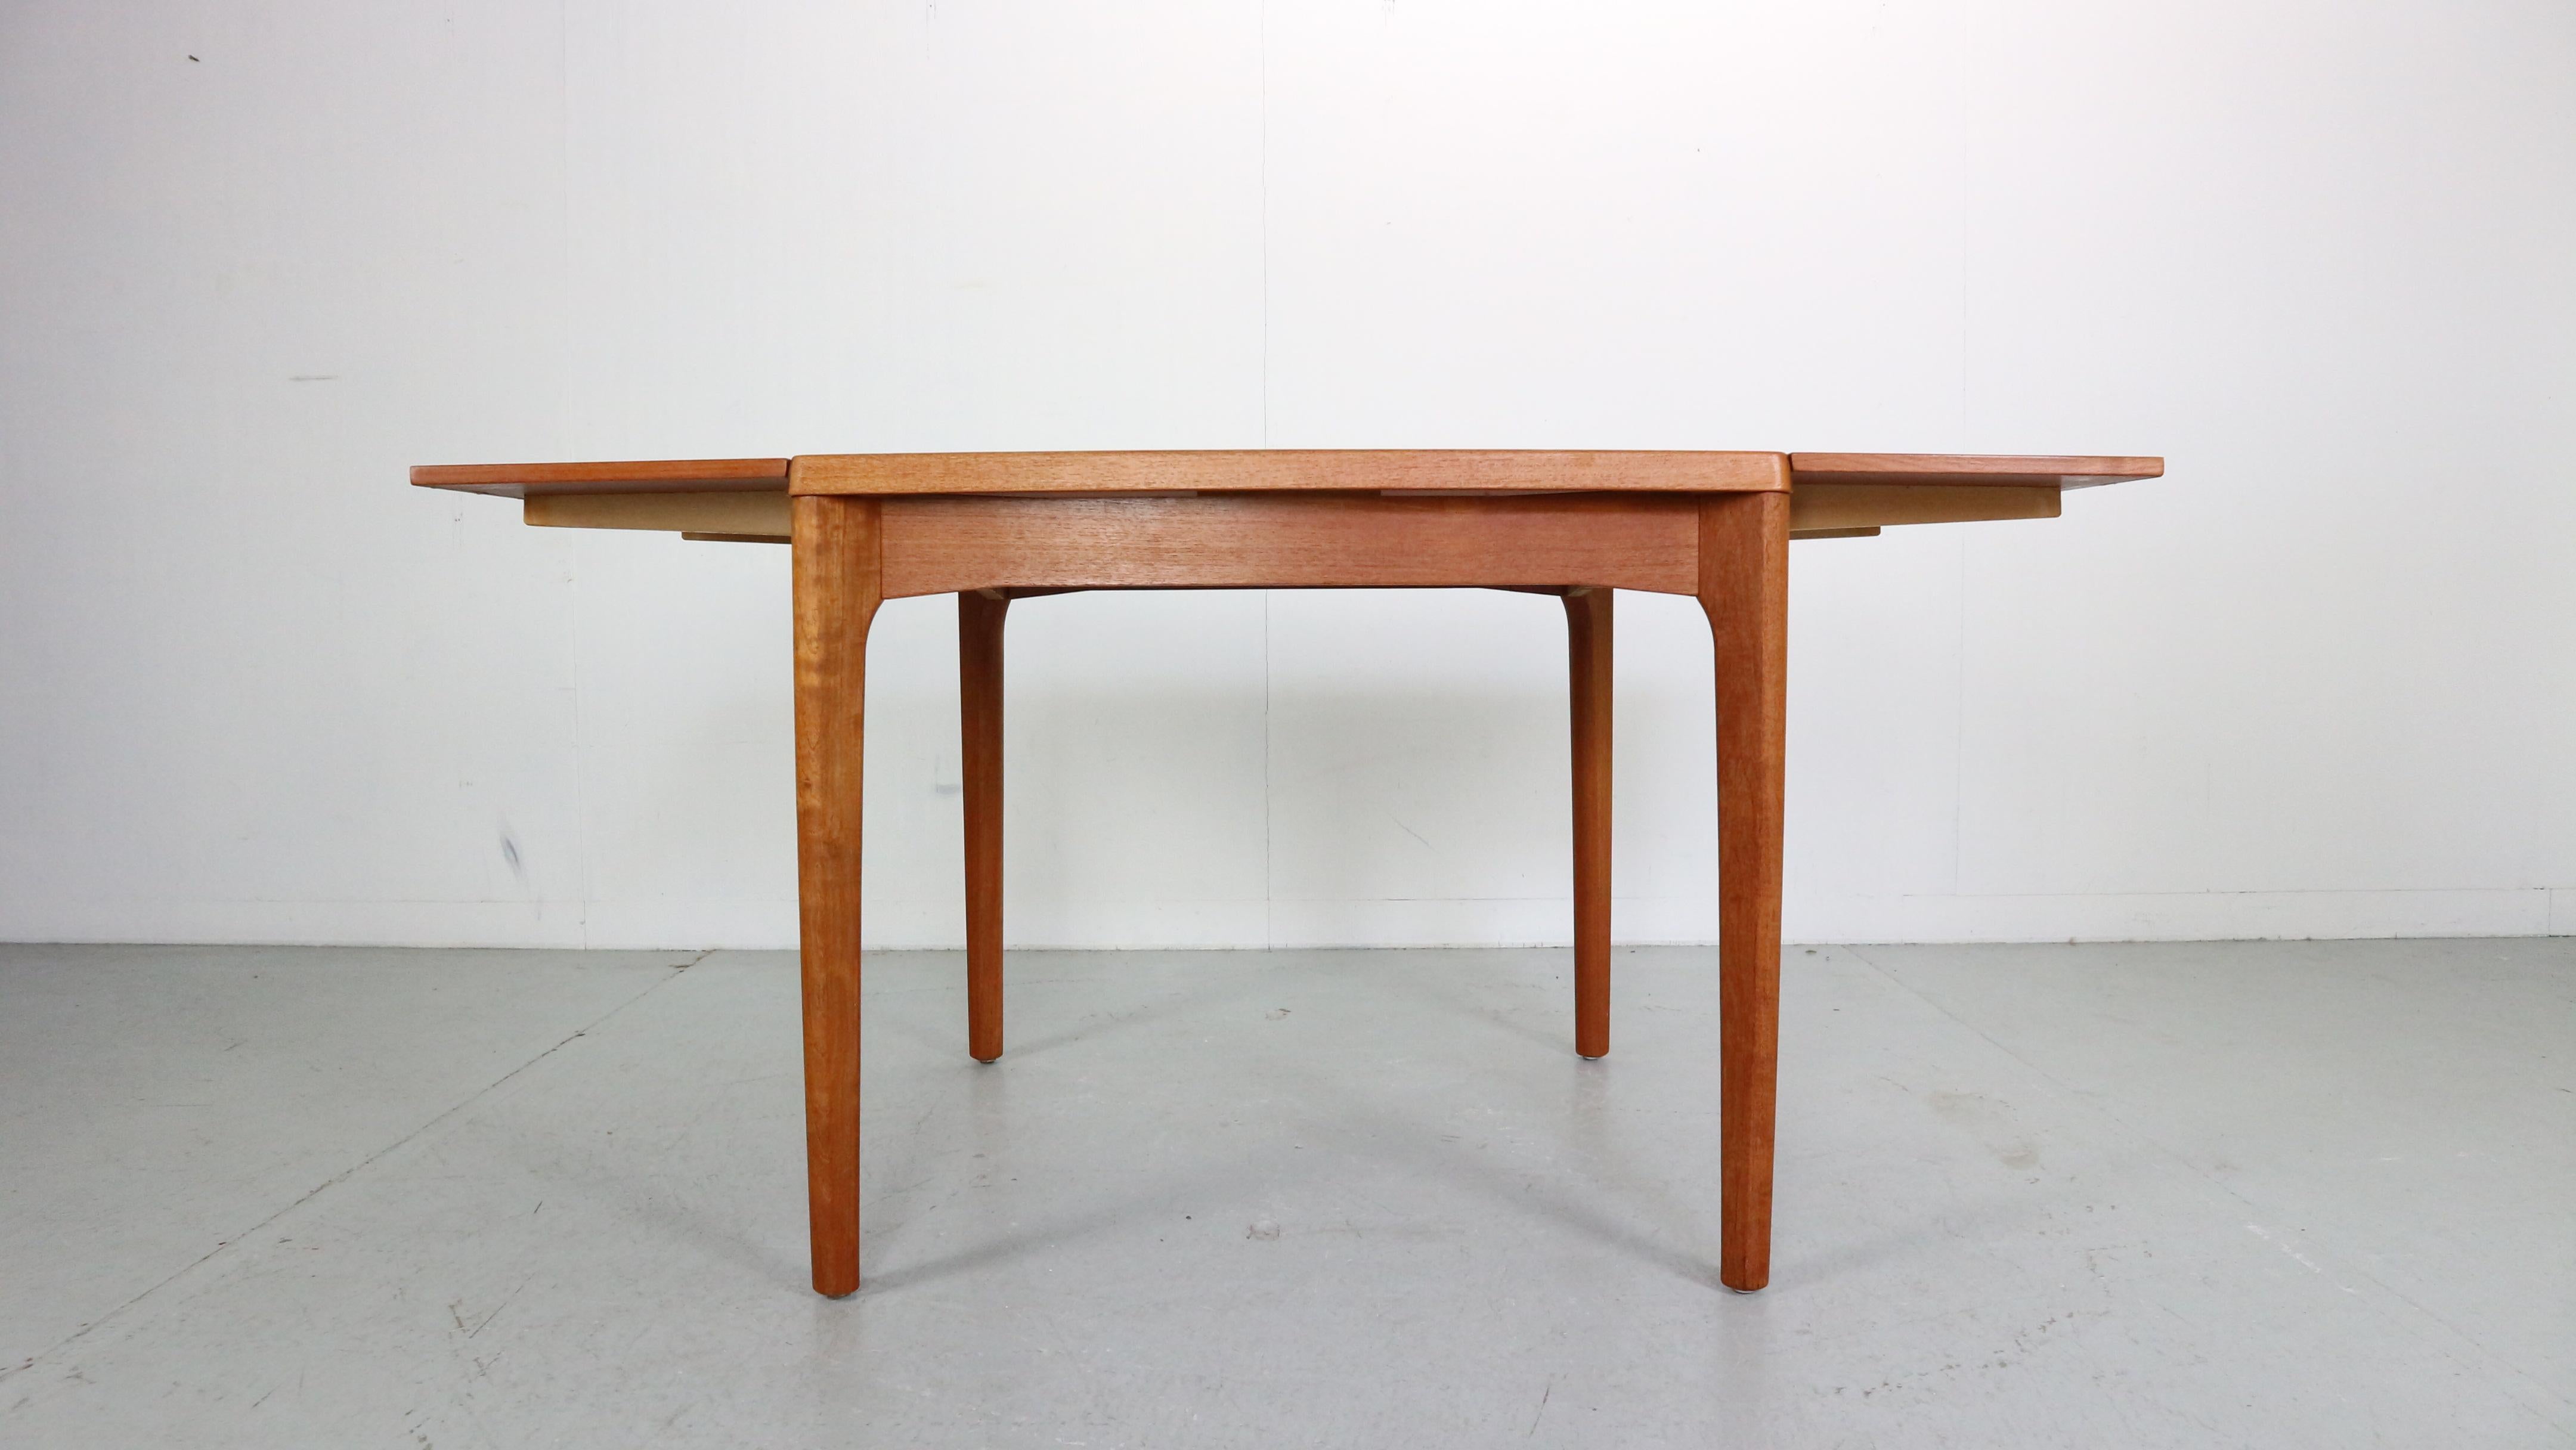 Mid-Century Modern Danish design dining table was designed by Henning Kjaernulf for Vejle Stole Møbelfabrik during the 1960s Denmark.
The table is extendable to 150cm wide, then not extended becomes square shape table to 84x 84cm wide top.
Teak